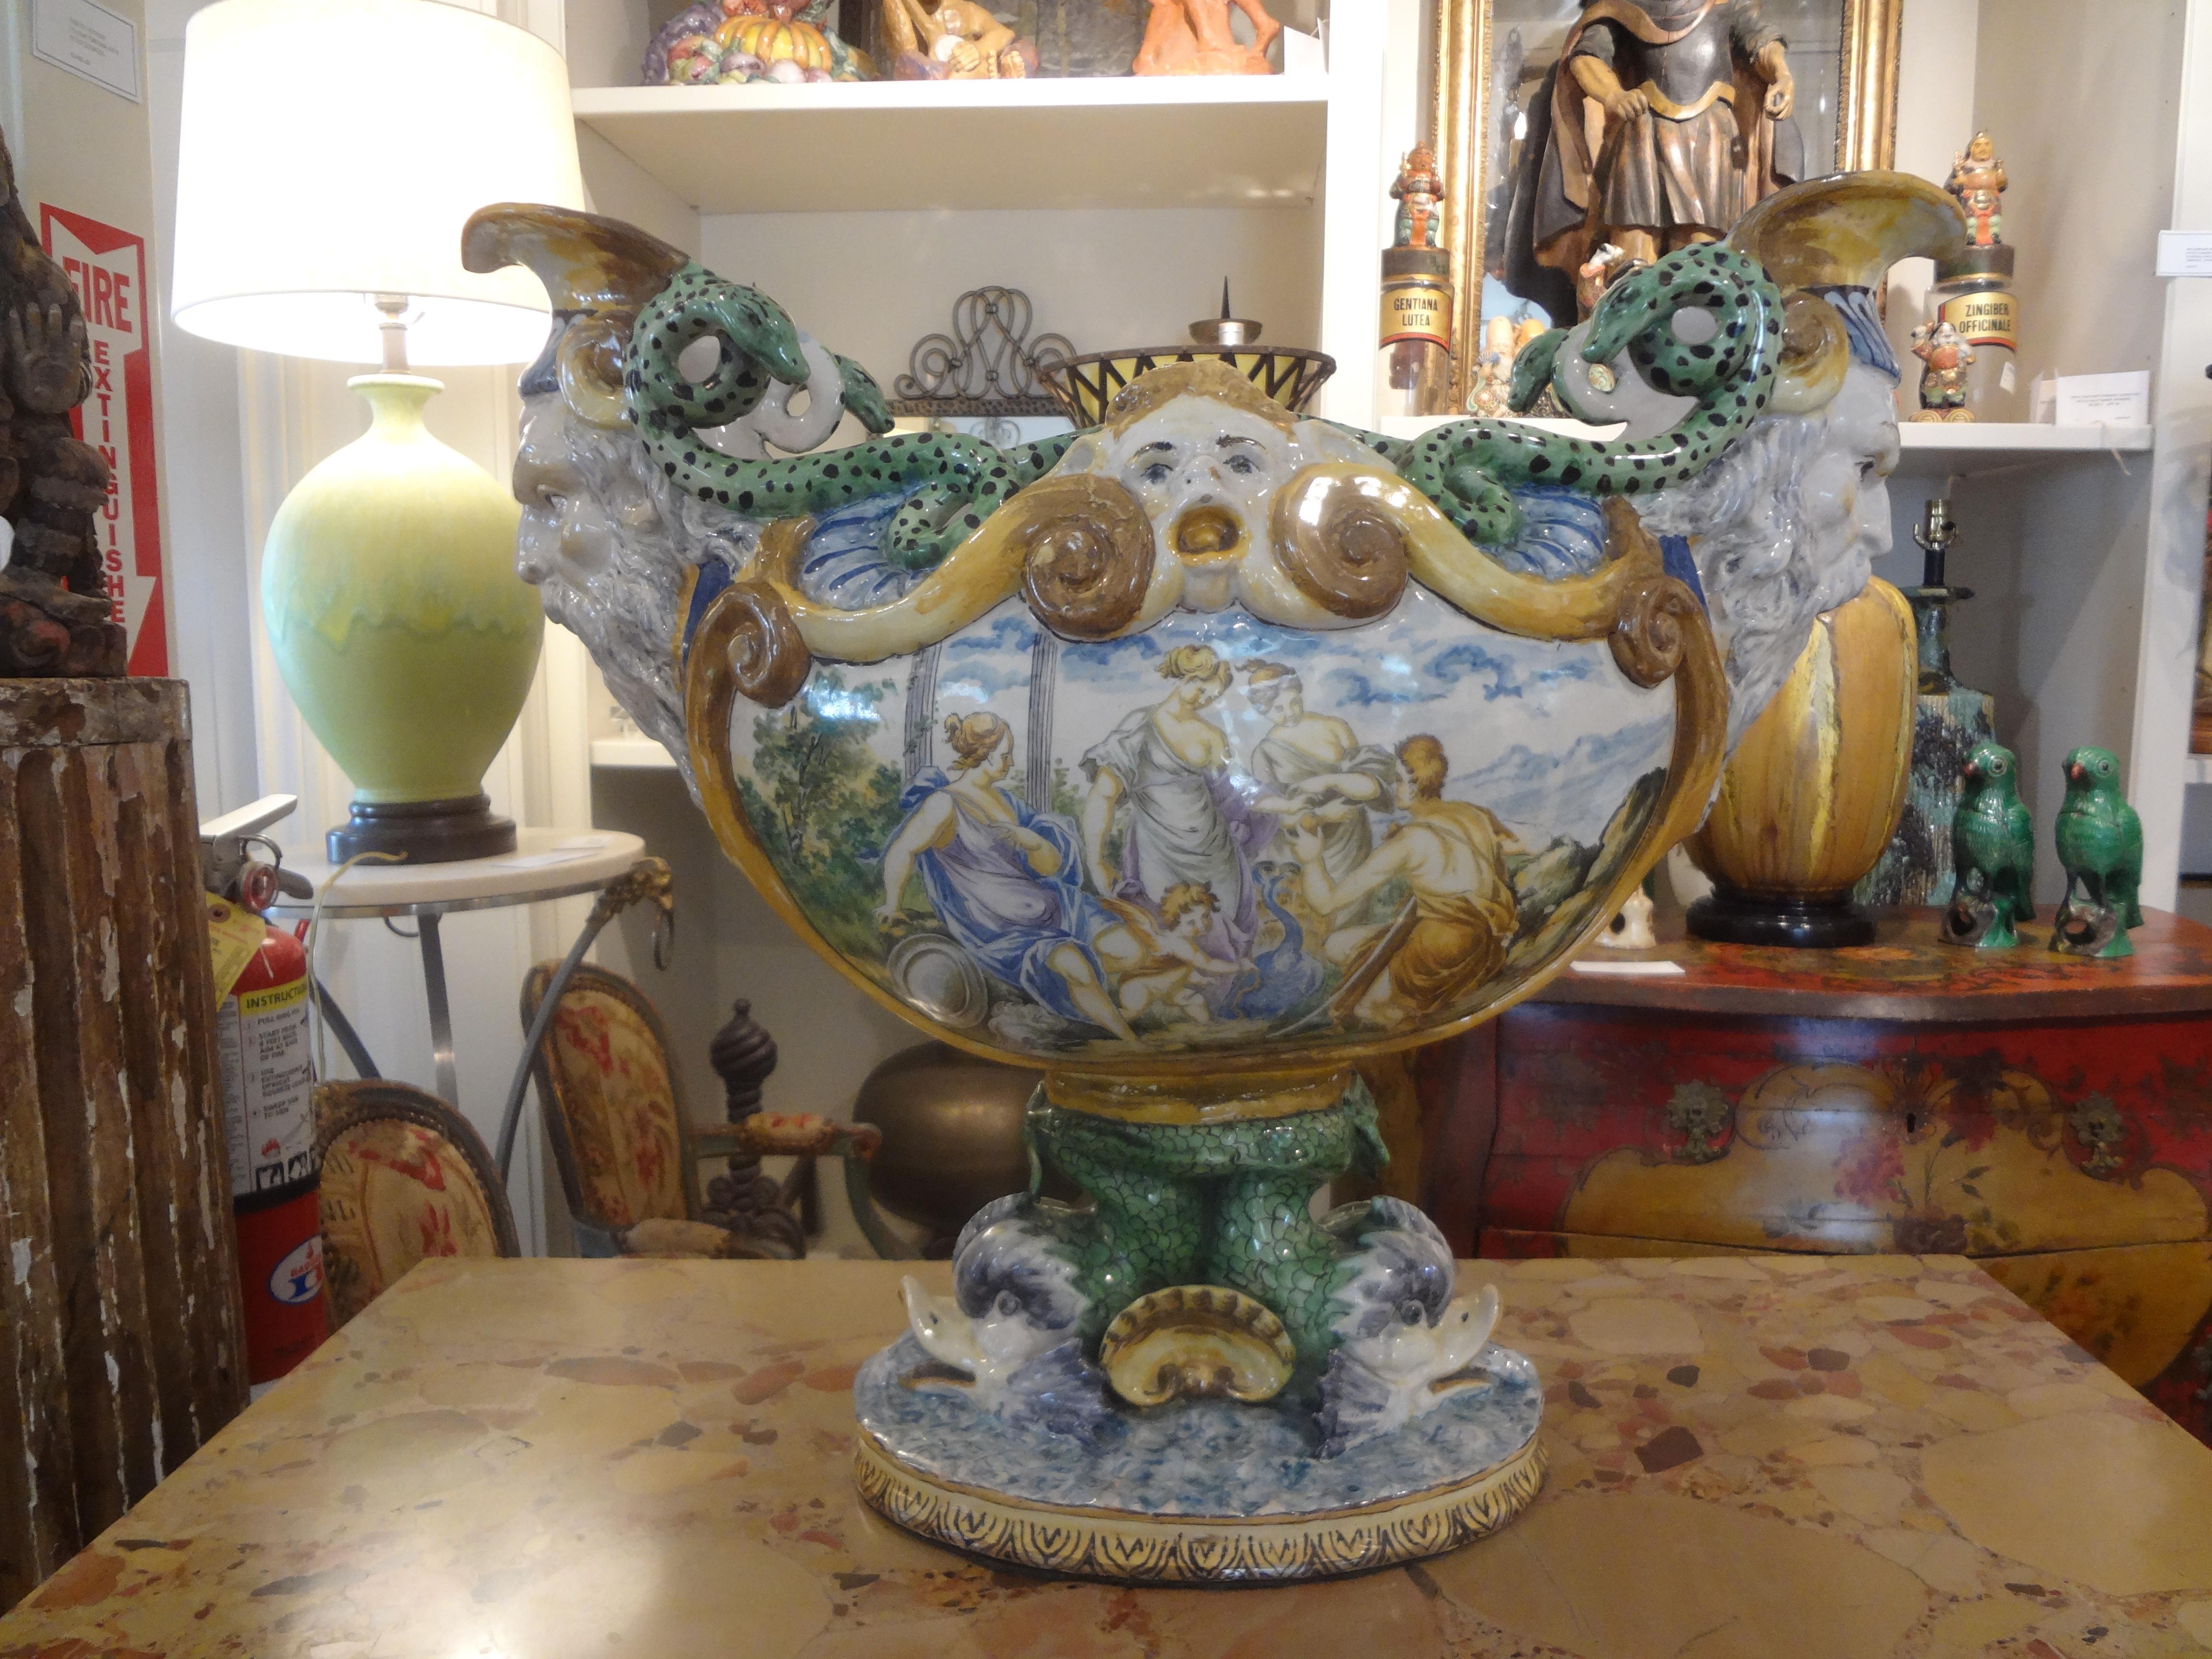 Early 20th century Italian majolica urn. This gorgeous Italian majolica or maiolica urn or jardiniere is hand decorated with serpents, dolphins and shells. Large enough to accommodate your favorite orchid plant, fresh flowers, blooming plant or